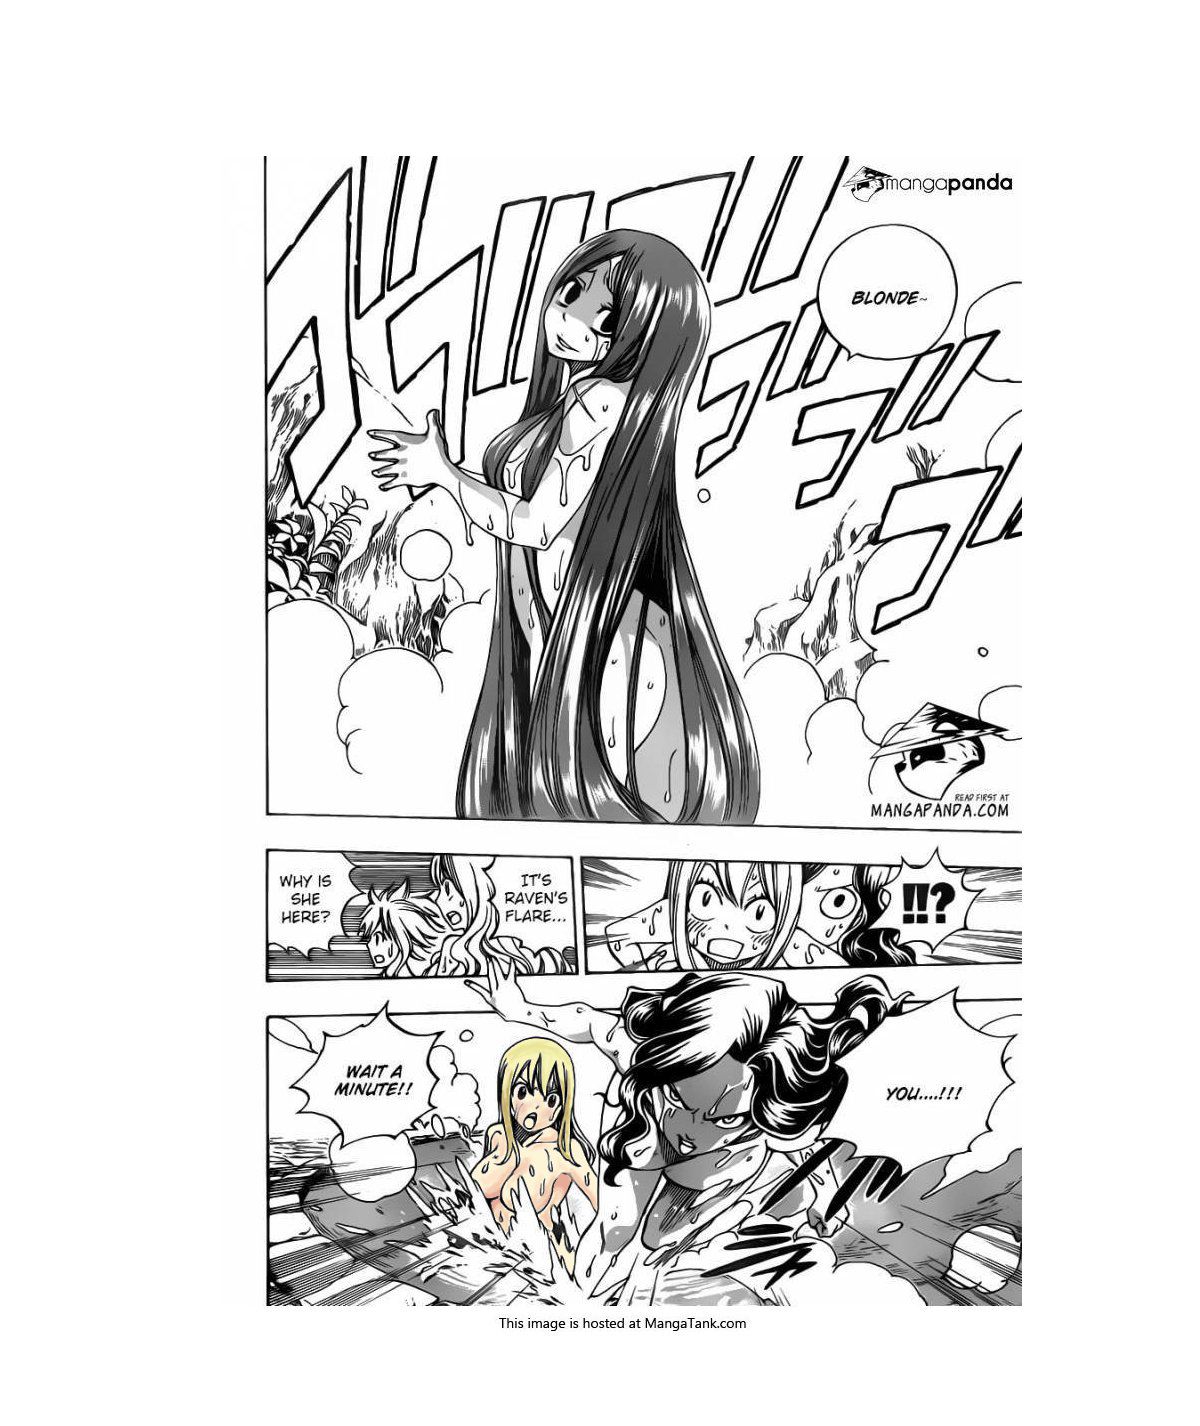 [Image] two-dimensional said "fairy tail, Lucy's erotic Bishoujo wwwwwww 6